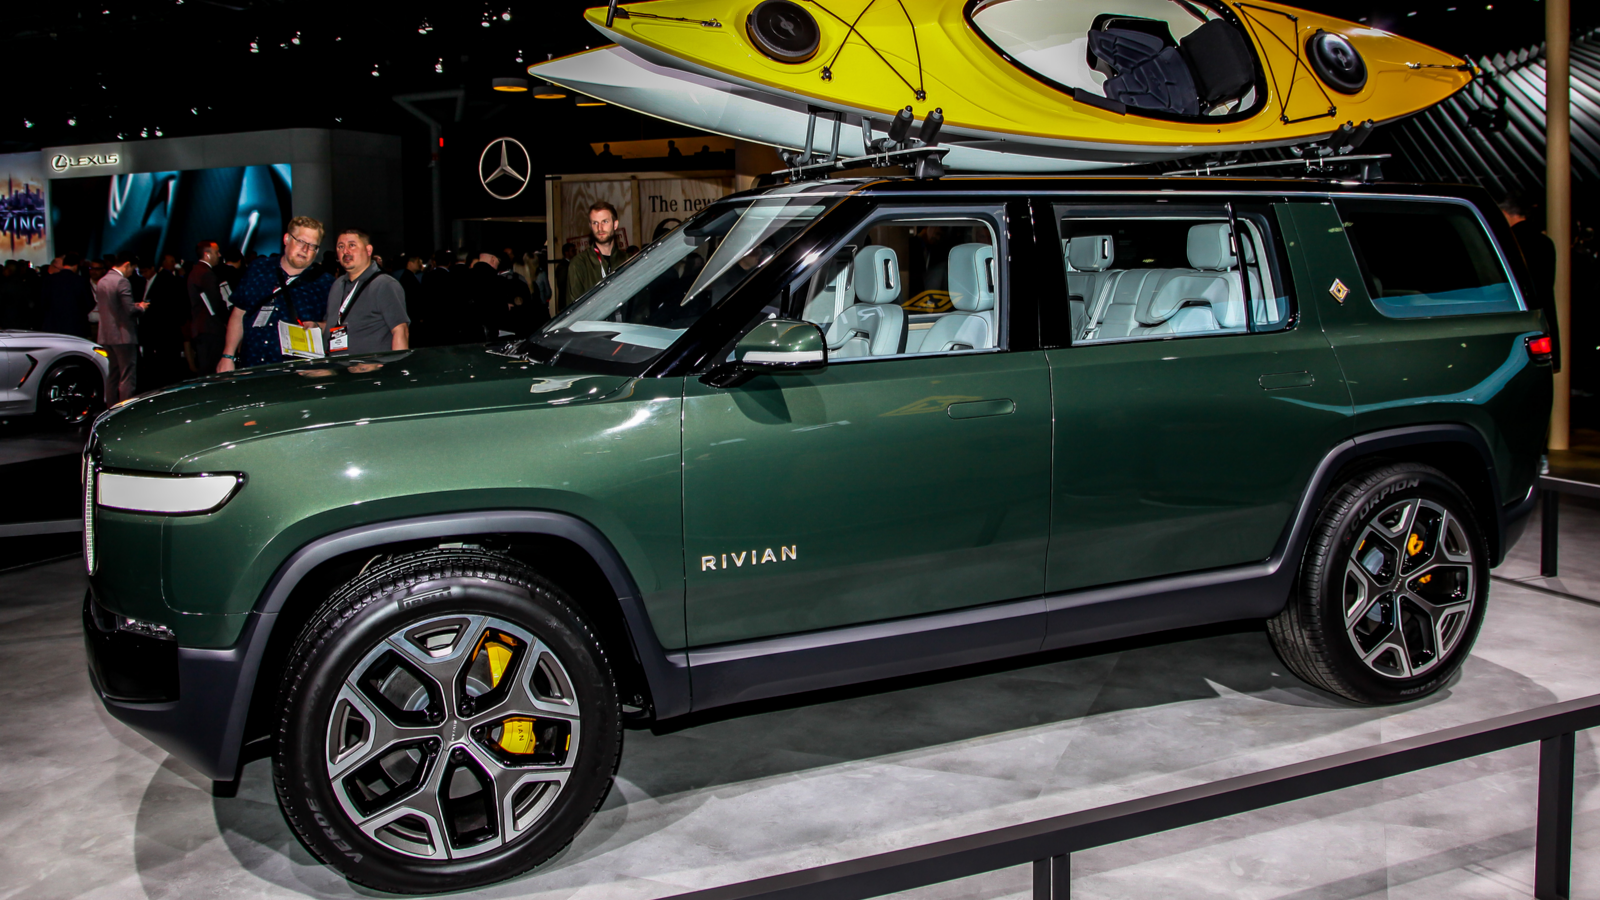 Rivian (RIVN) is new electric vehicle shown at the New York International Auto Show 2019, at the Jacob Javits Center. This was Press Preview Day One of NYIAS